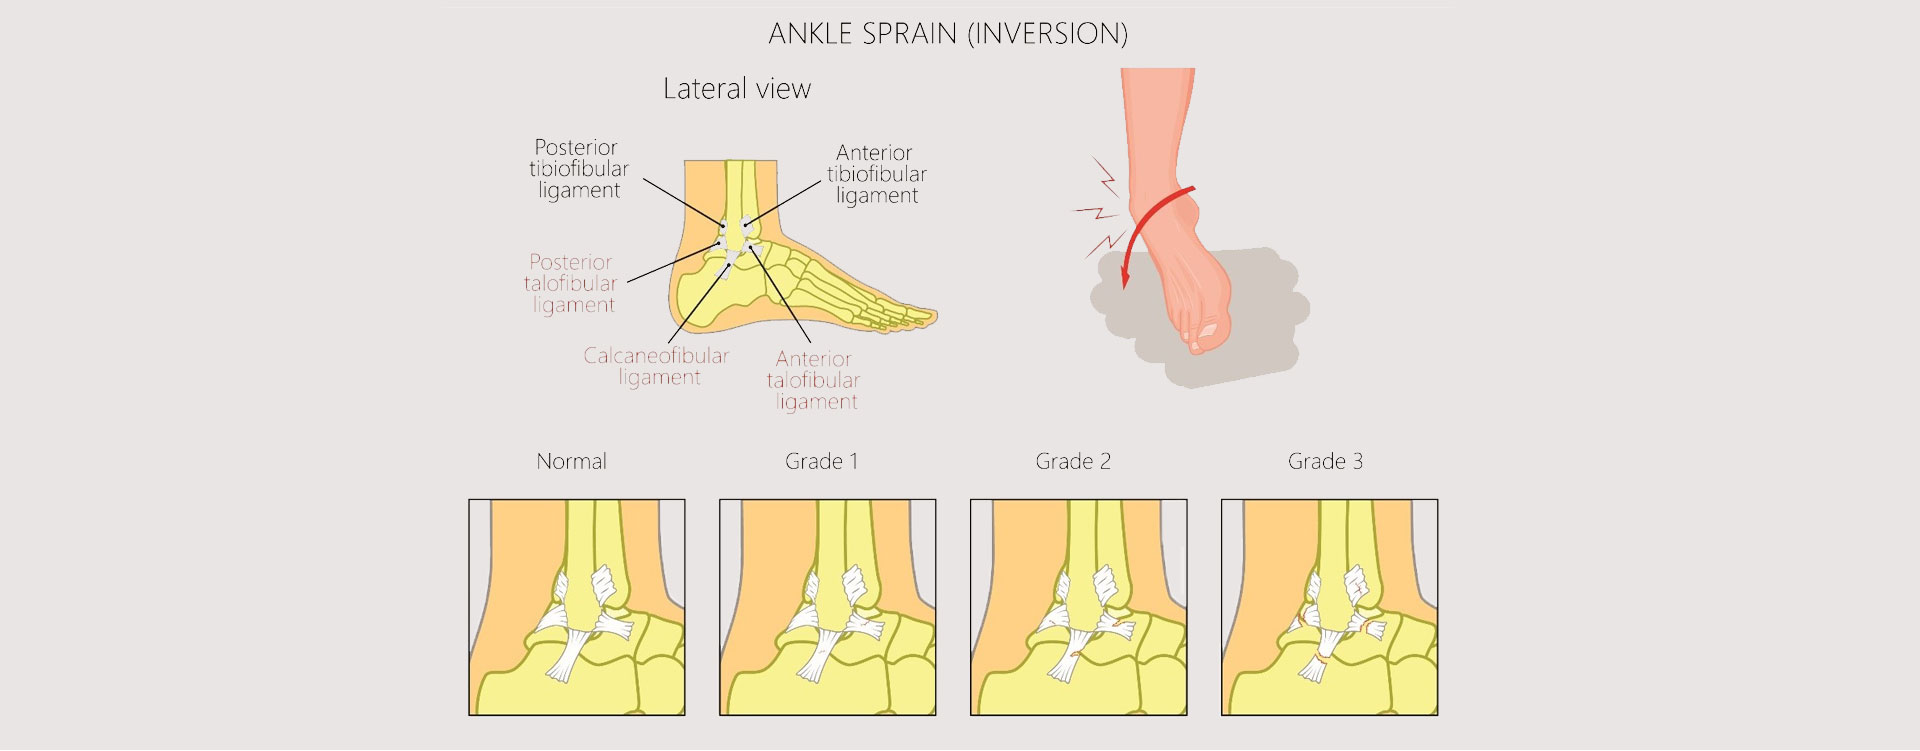 Lateral-Ankle-Sprain